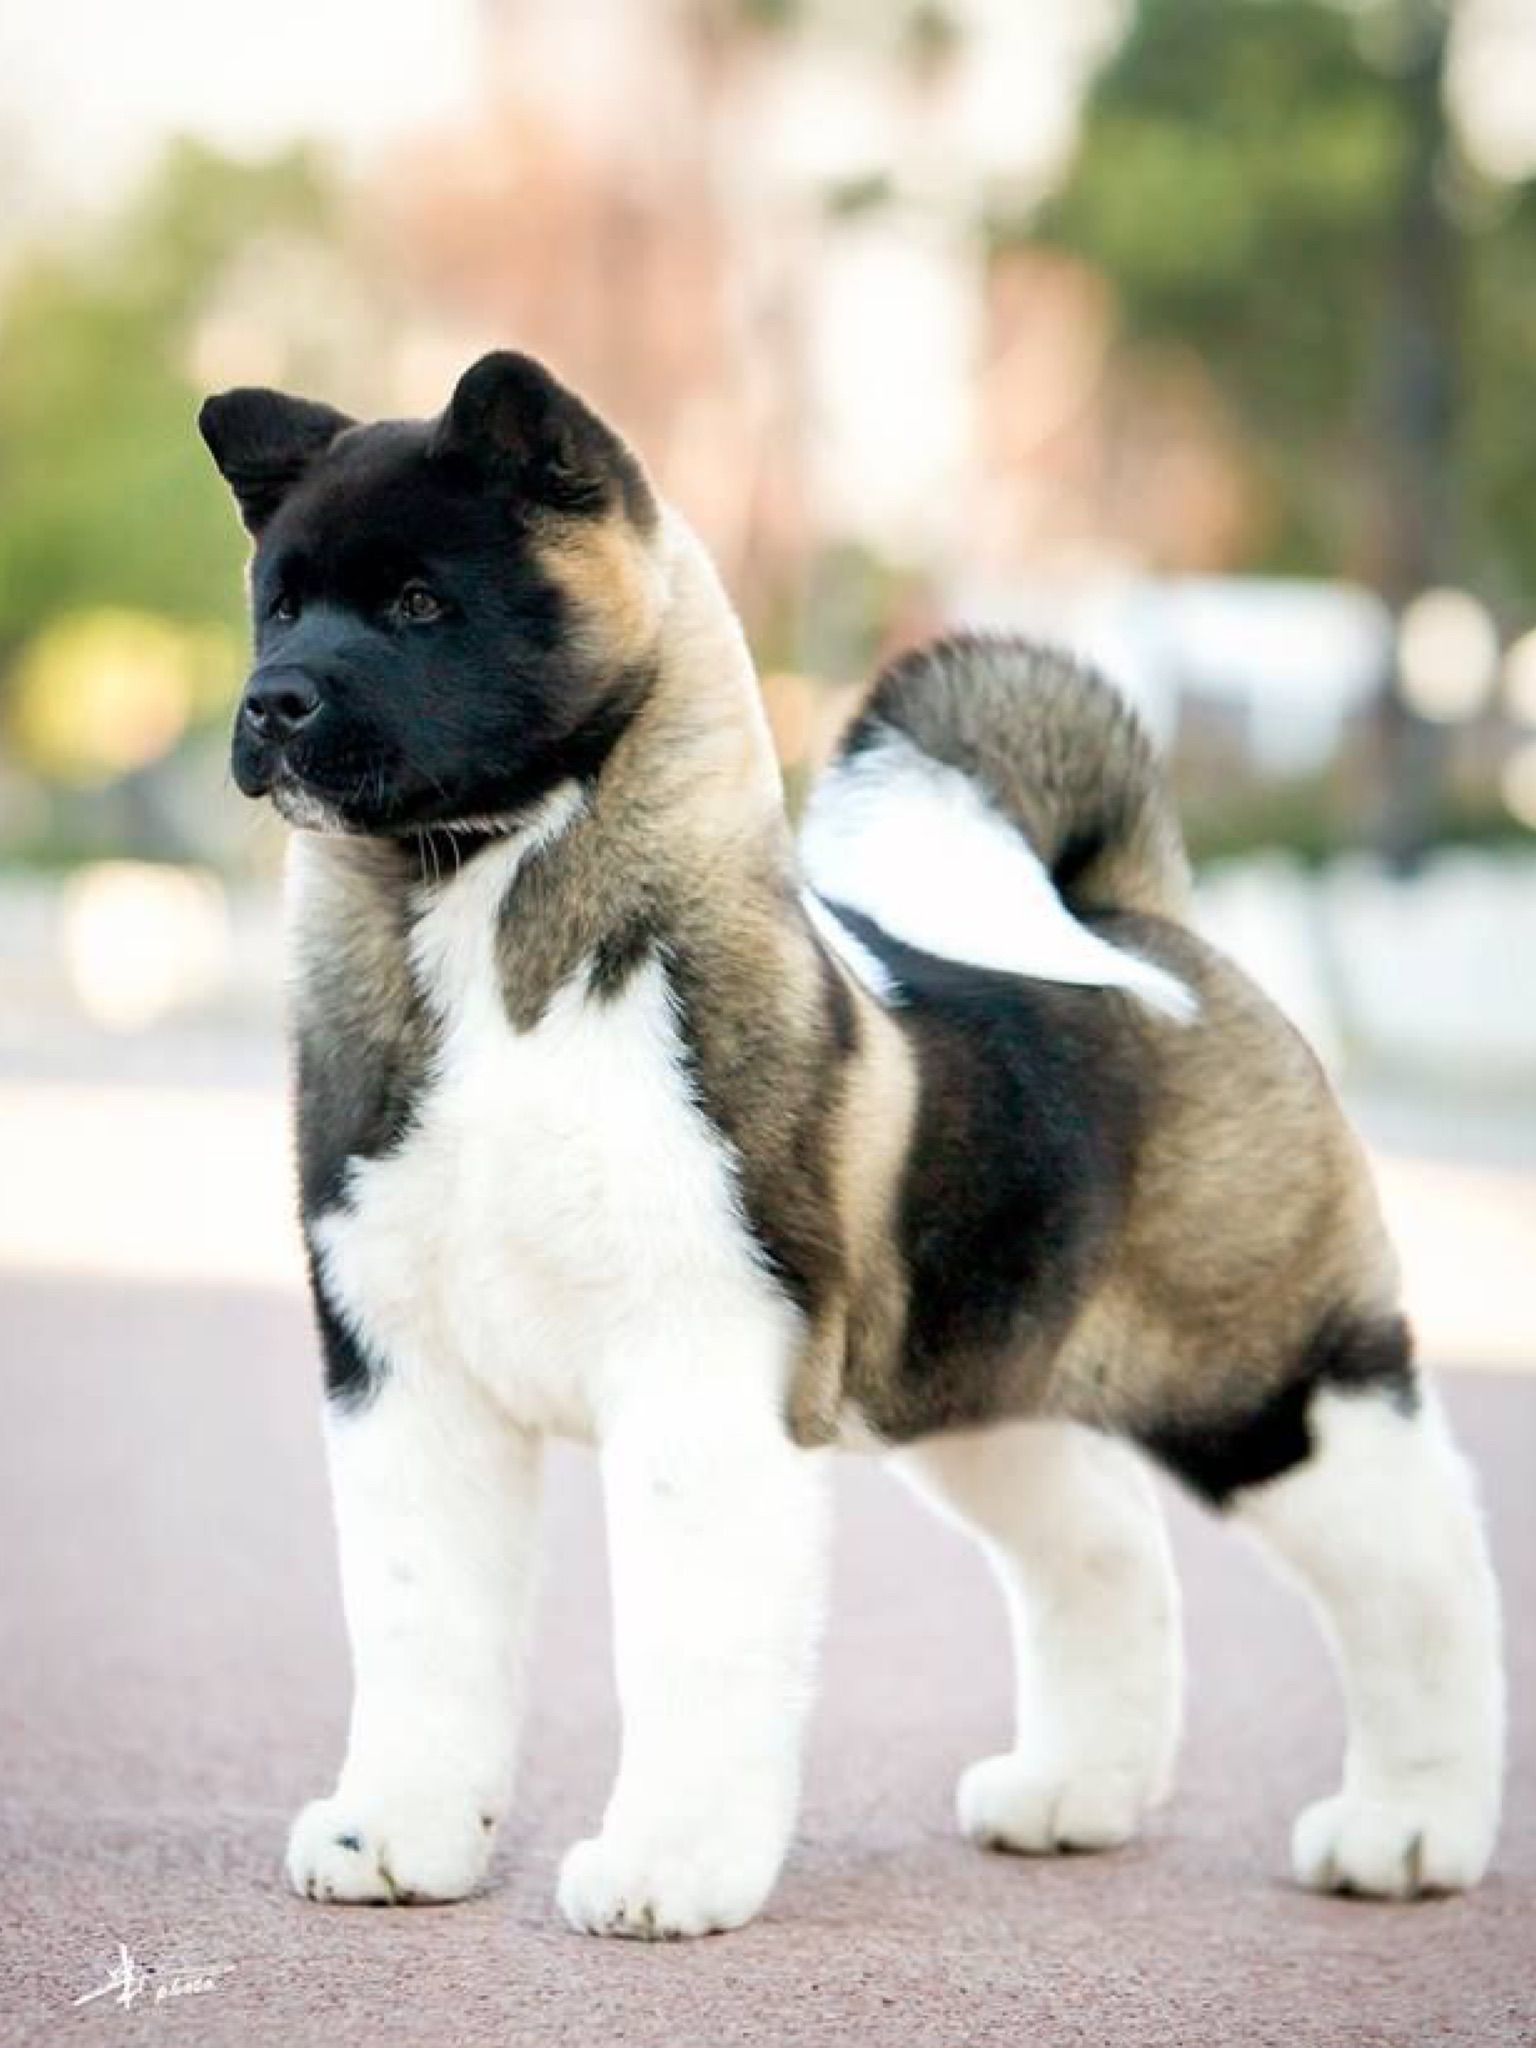 Pin by marielouise lomba on dogs | Pinterest | Akita, Dog and Animal